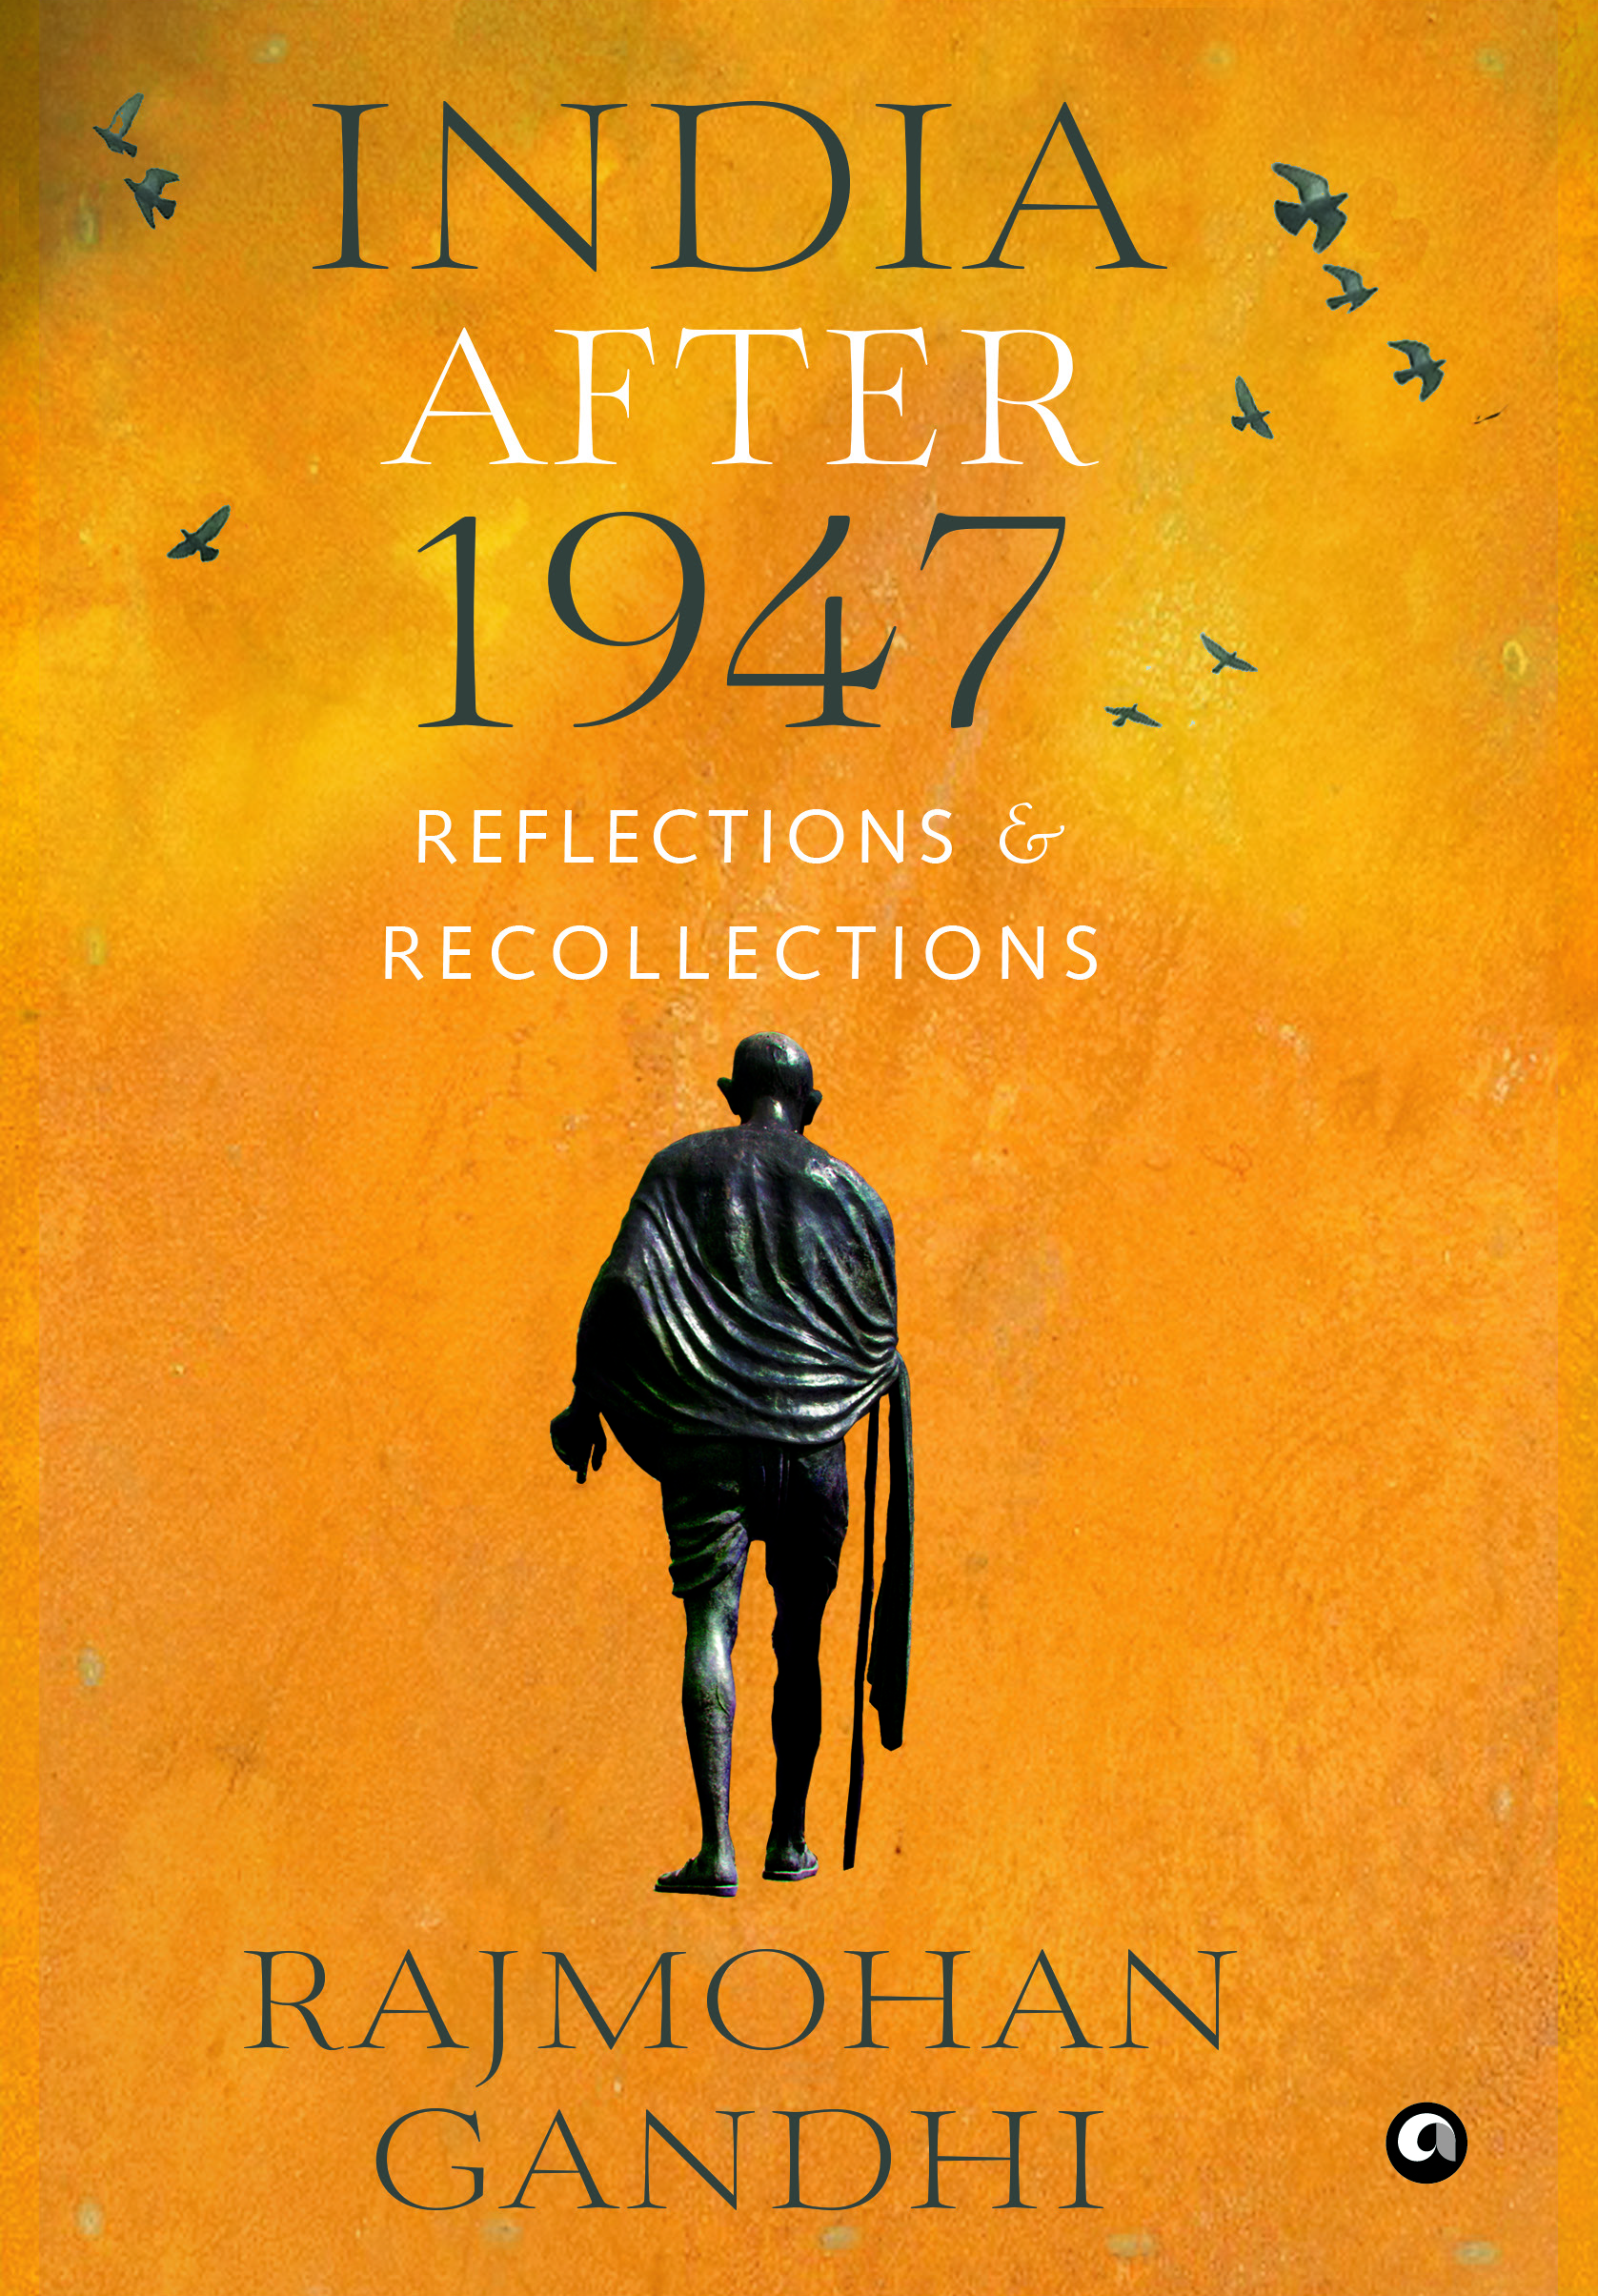 India After 1947: Reflections & Recollections